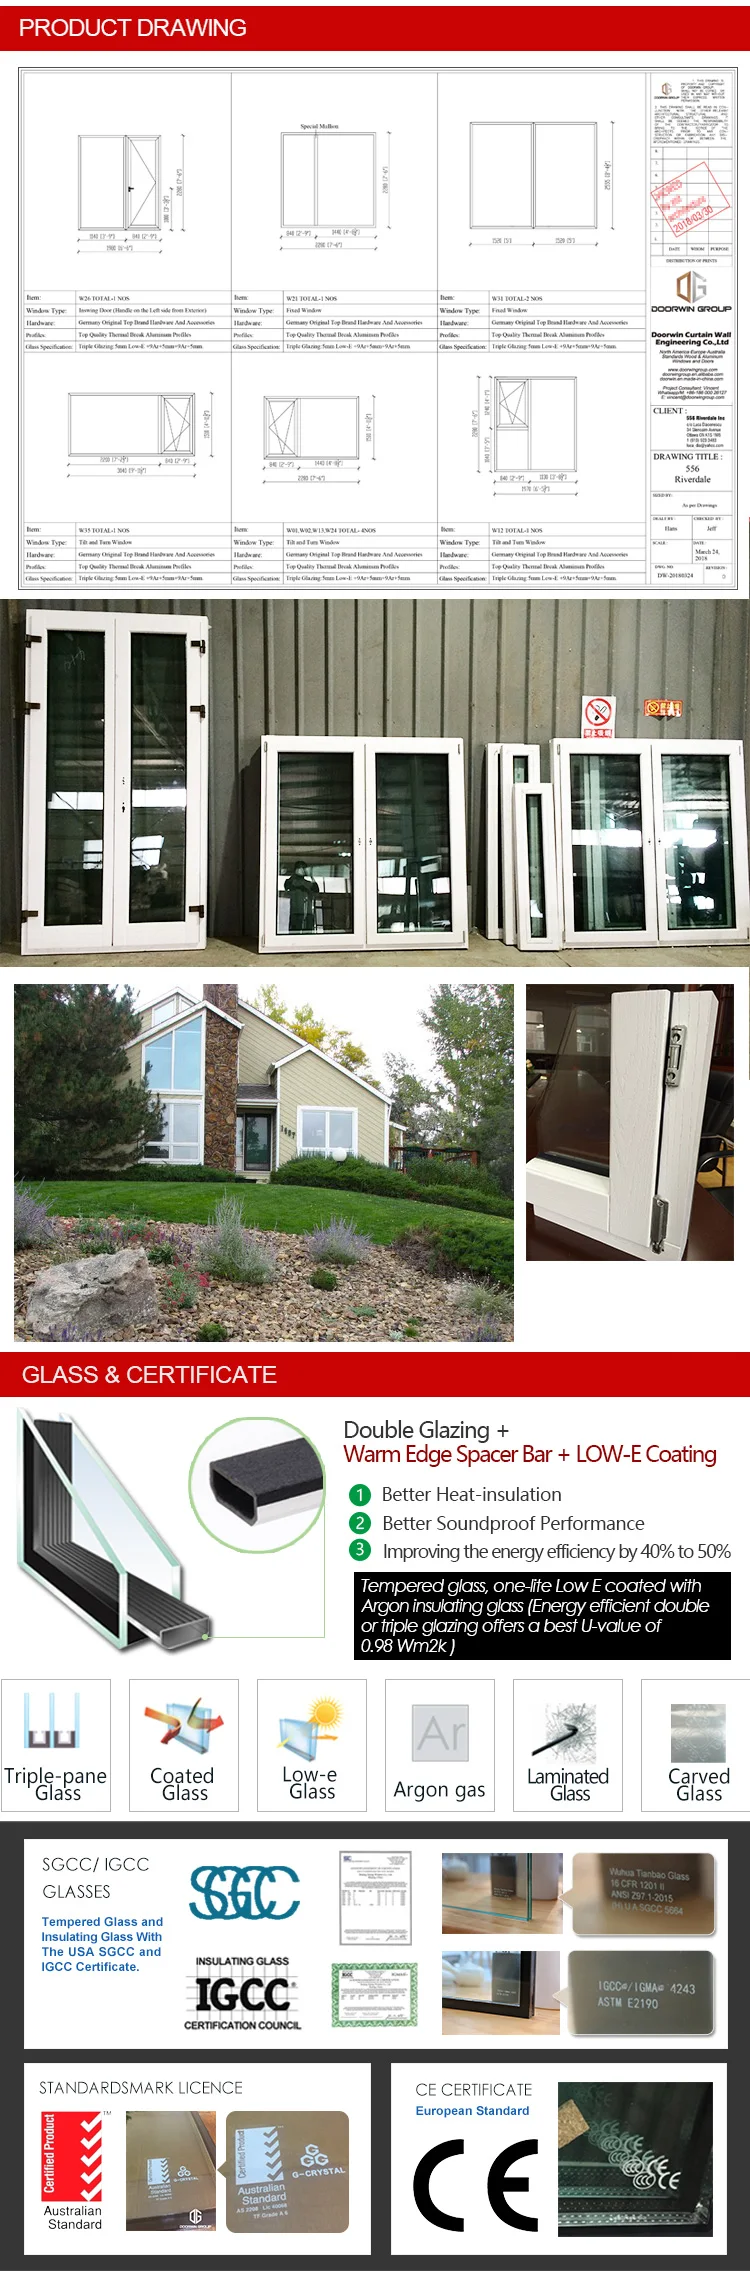 Top quality most energy efficient windows and doors merit commercial